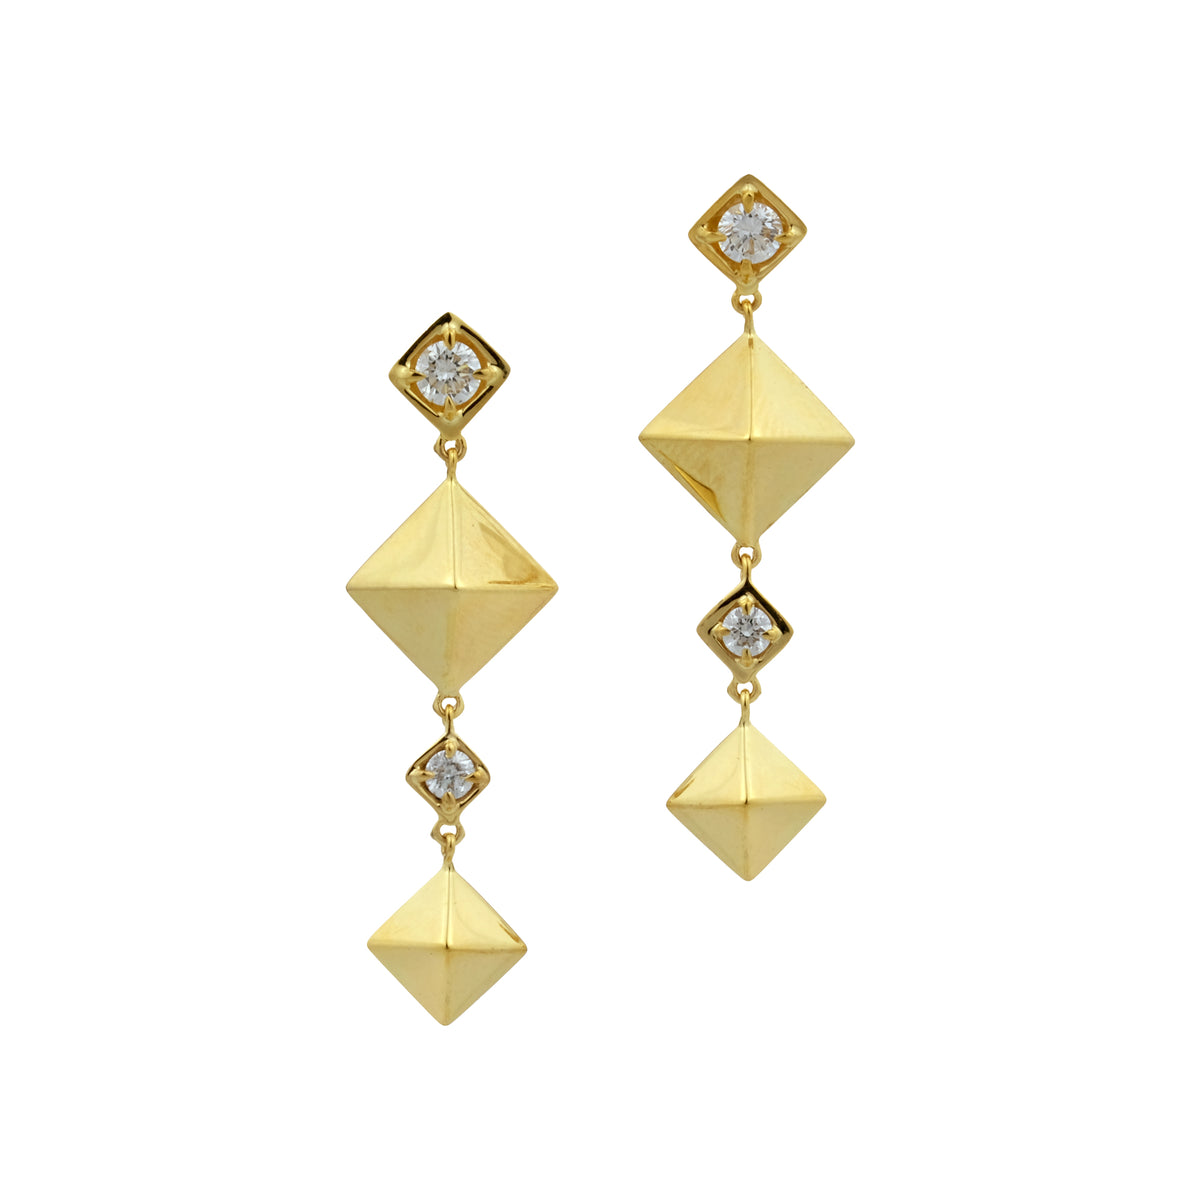 Octahedral Earrings with White Diamonds